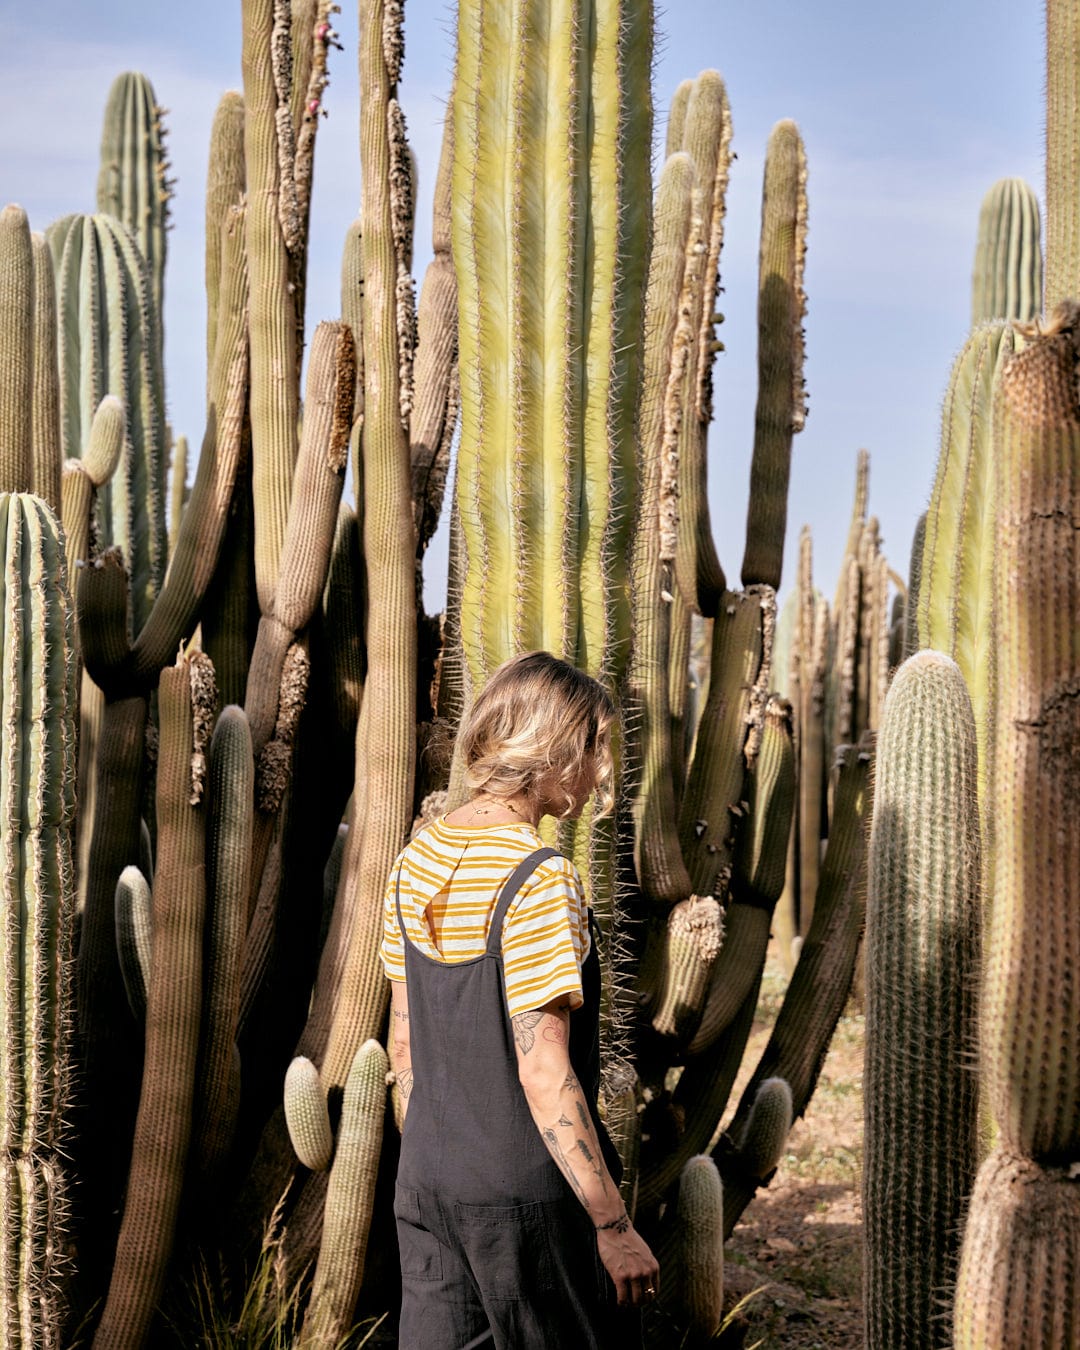 A person with tattoos, wearing a striped shirt and Saltrock's Nancy - Womens Dungarees - Dark Grey with adjustable tie straps, stands among tall cactus plants under a clear sky.